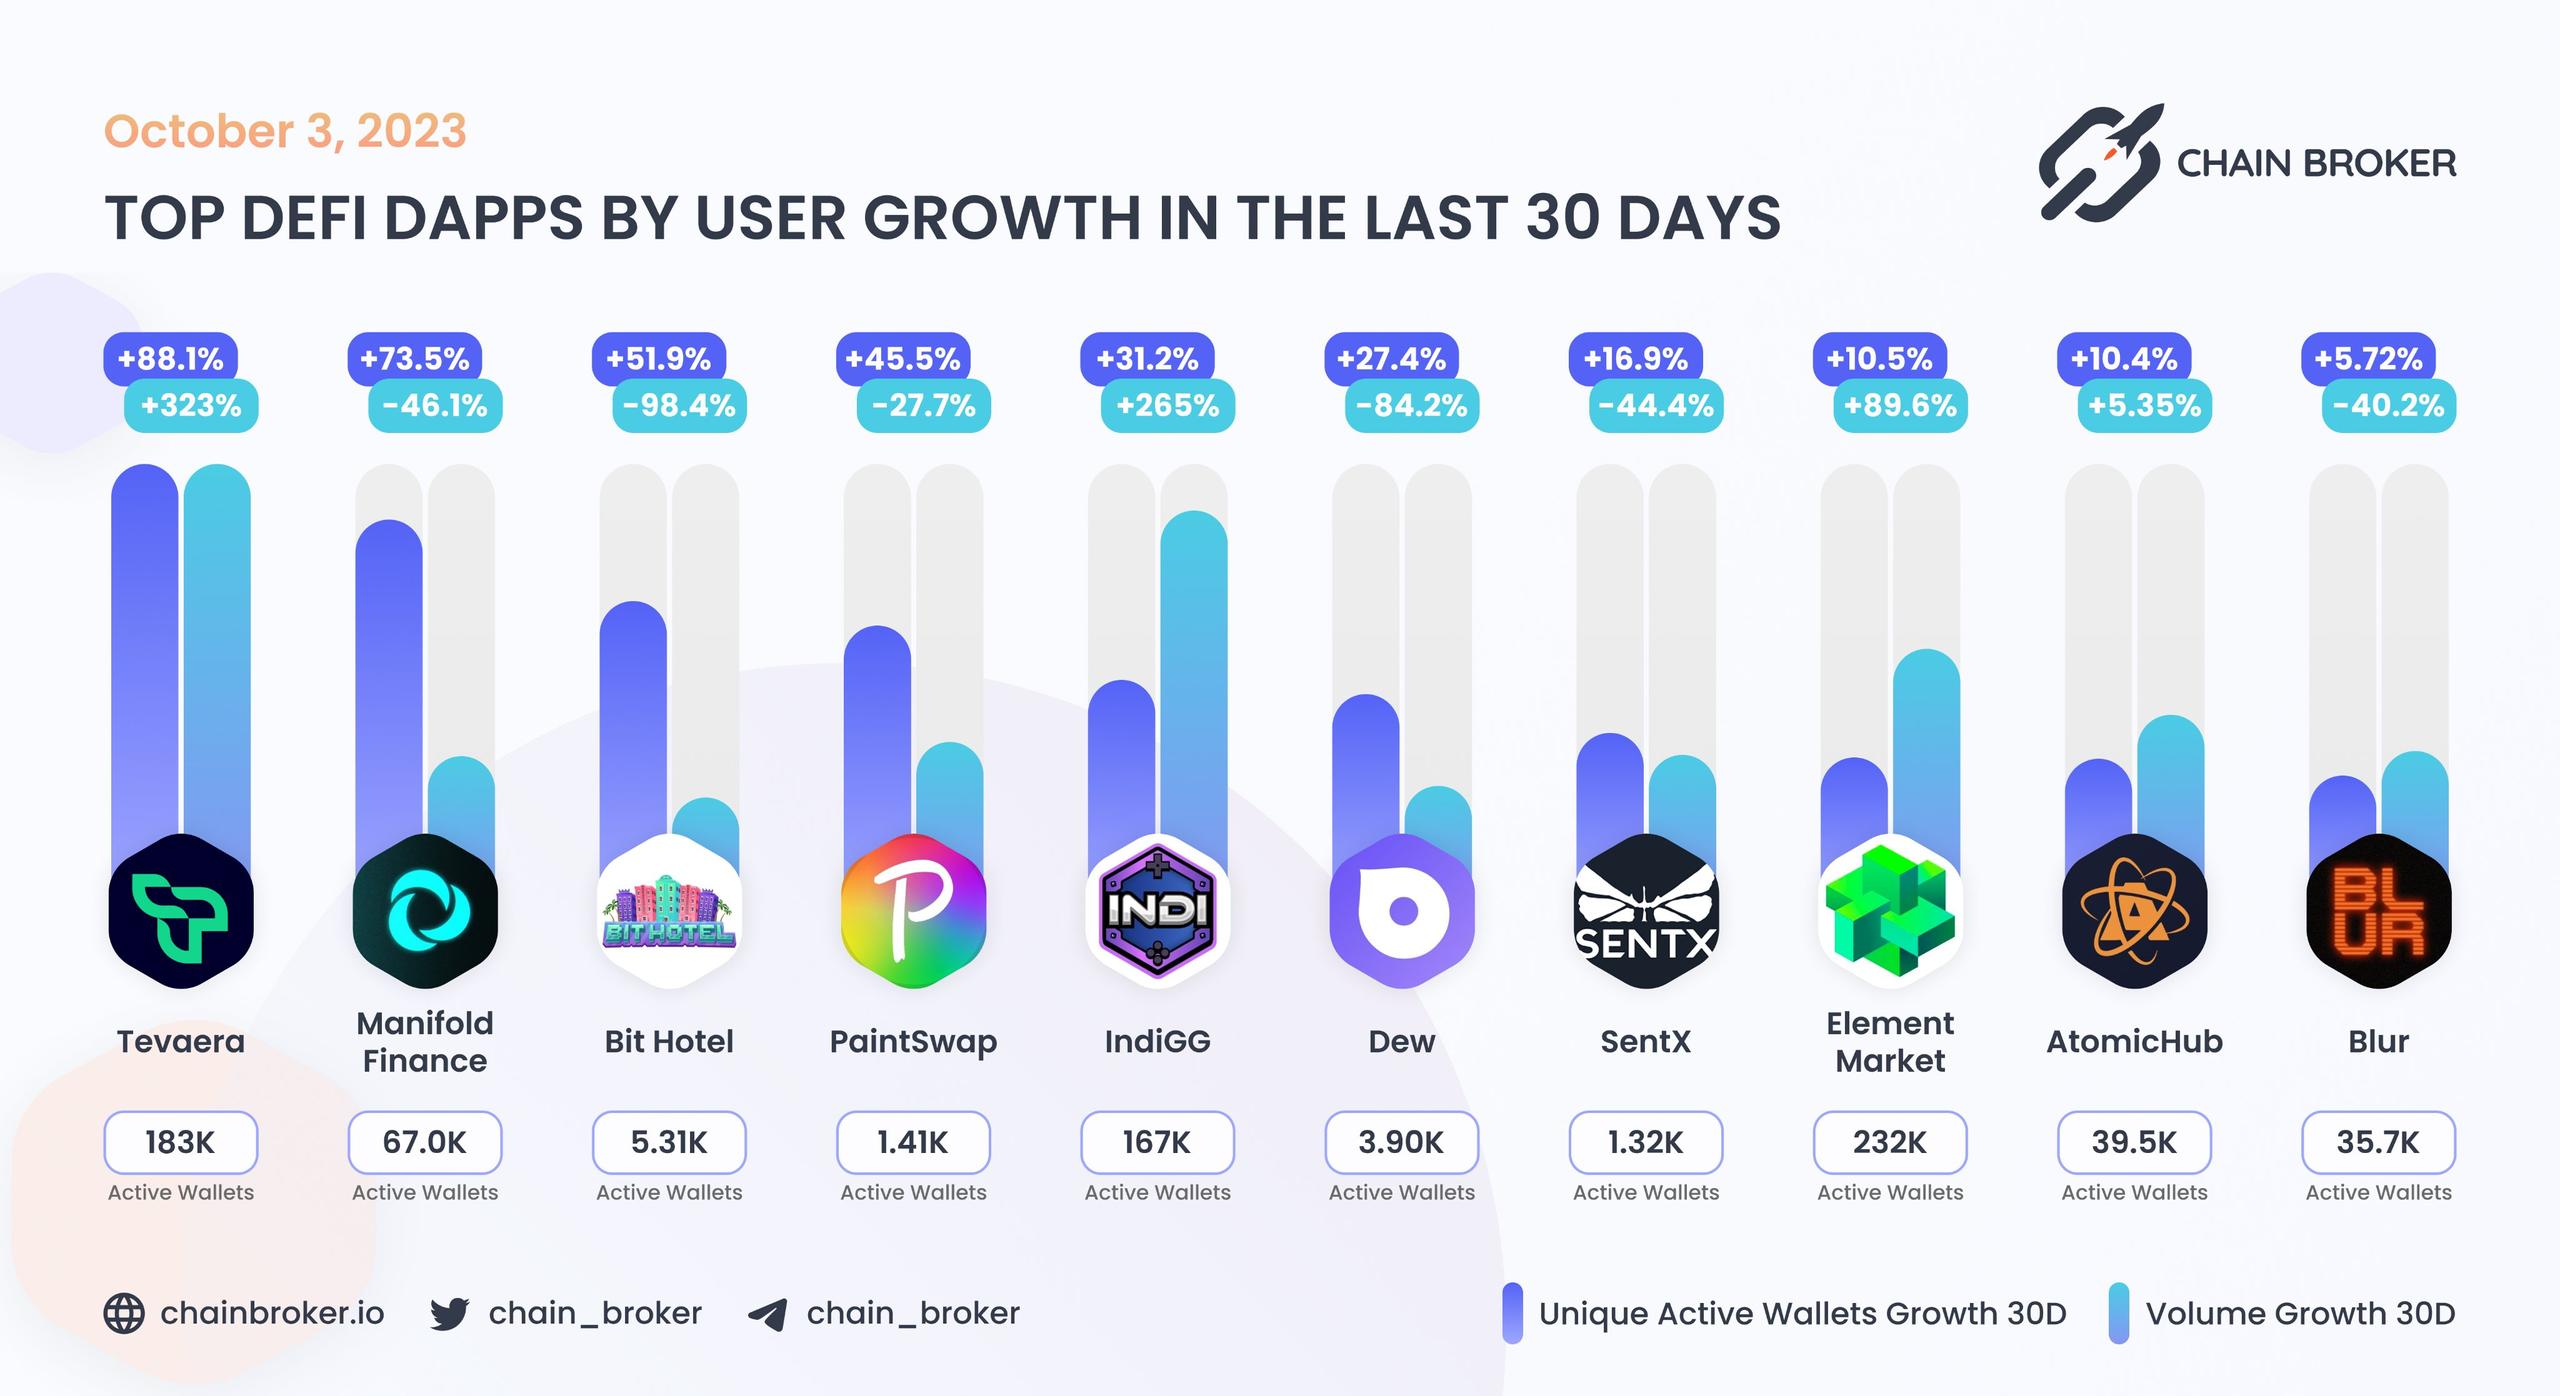 Top DeFi dapps by users